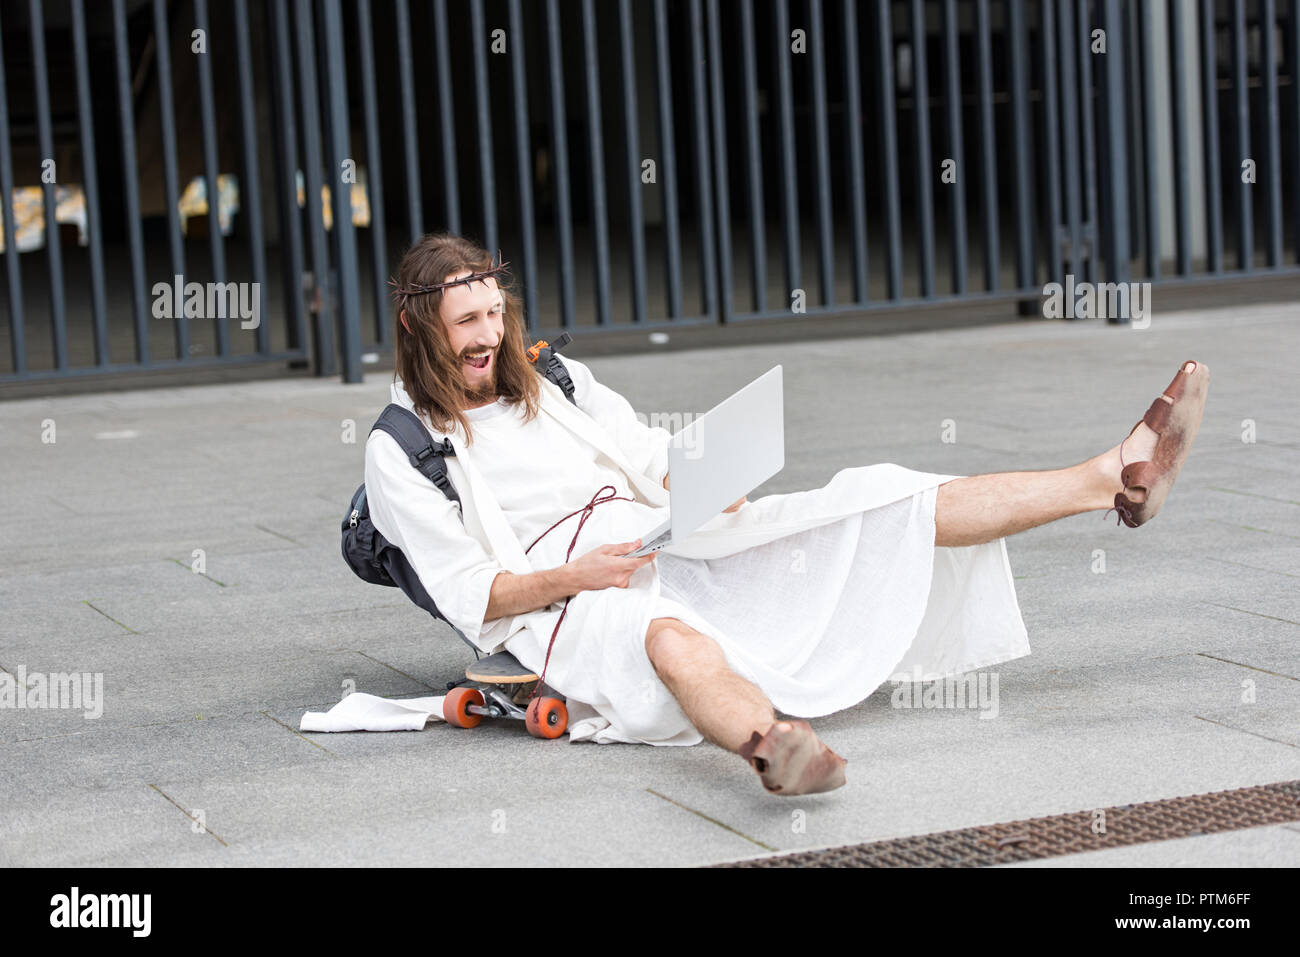 laughing Jesus in robe and crown of thorns sitting on skateboard and using laptop in city Stock Photo